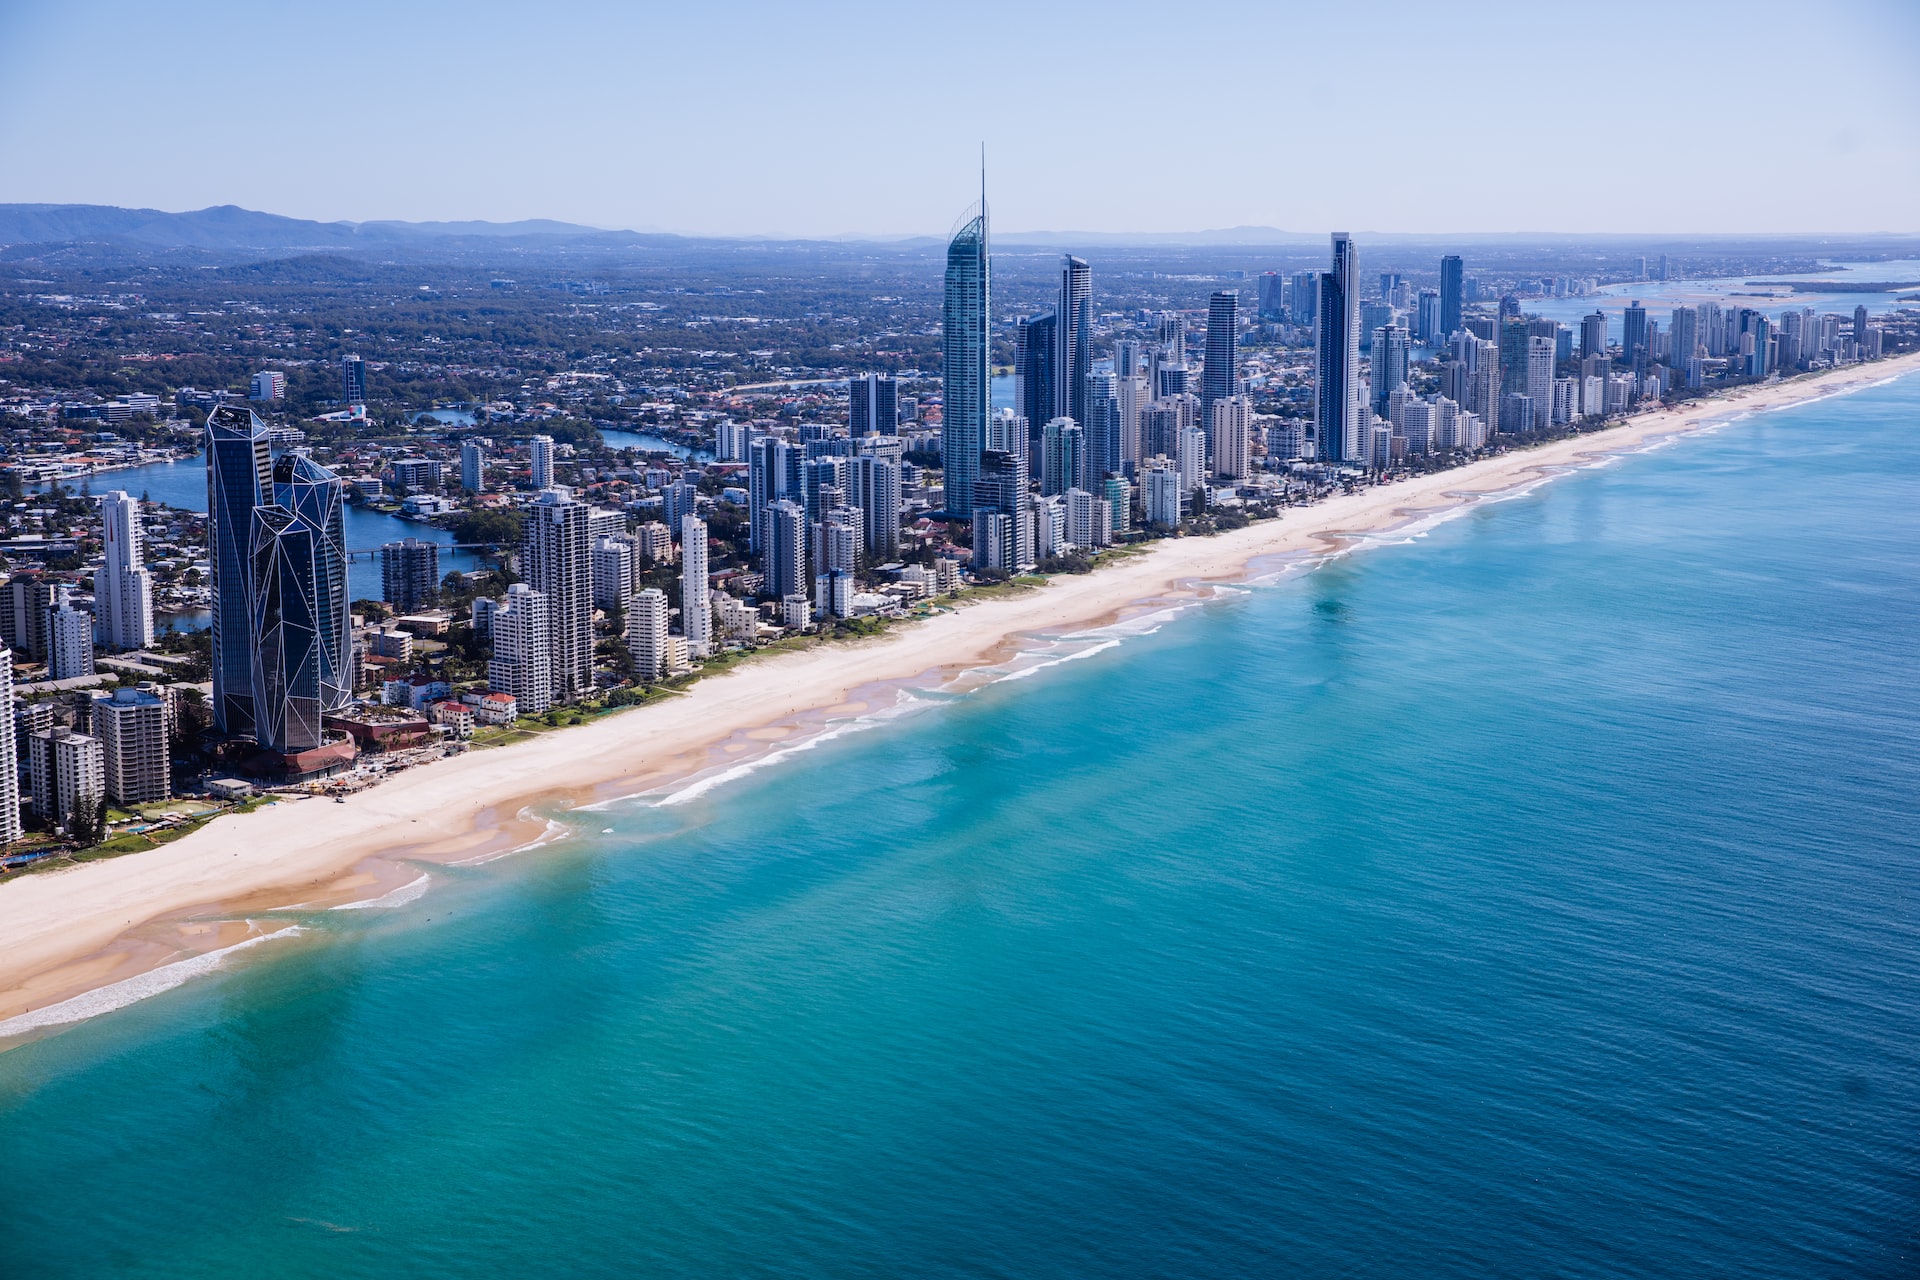 A surfer's paradise from the air looking northeast.